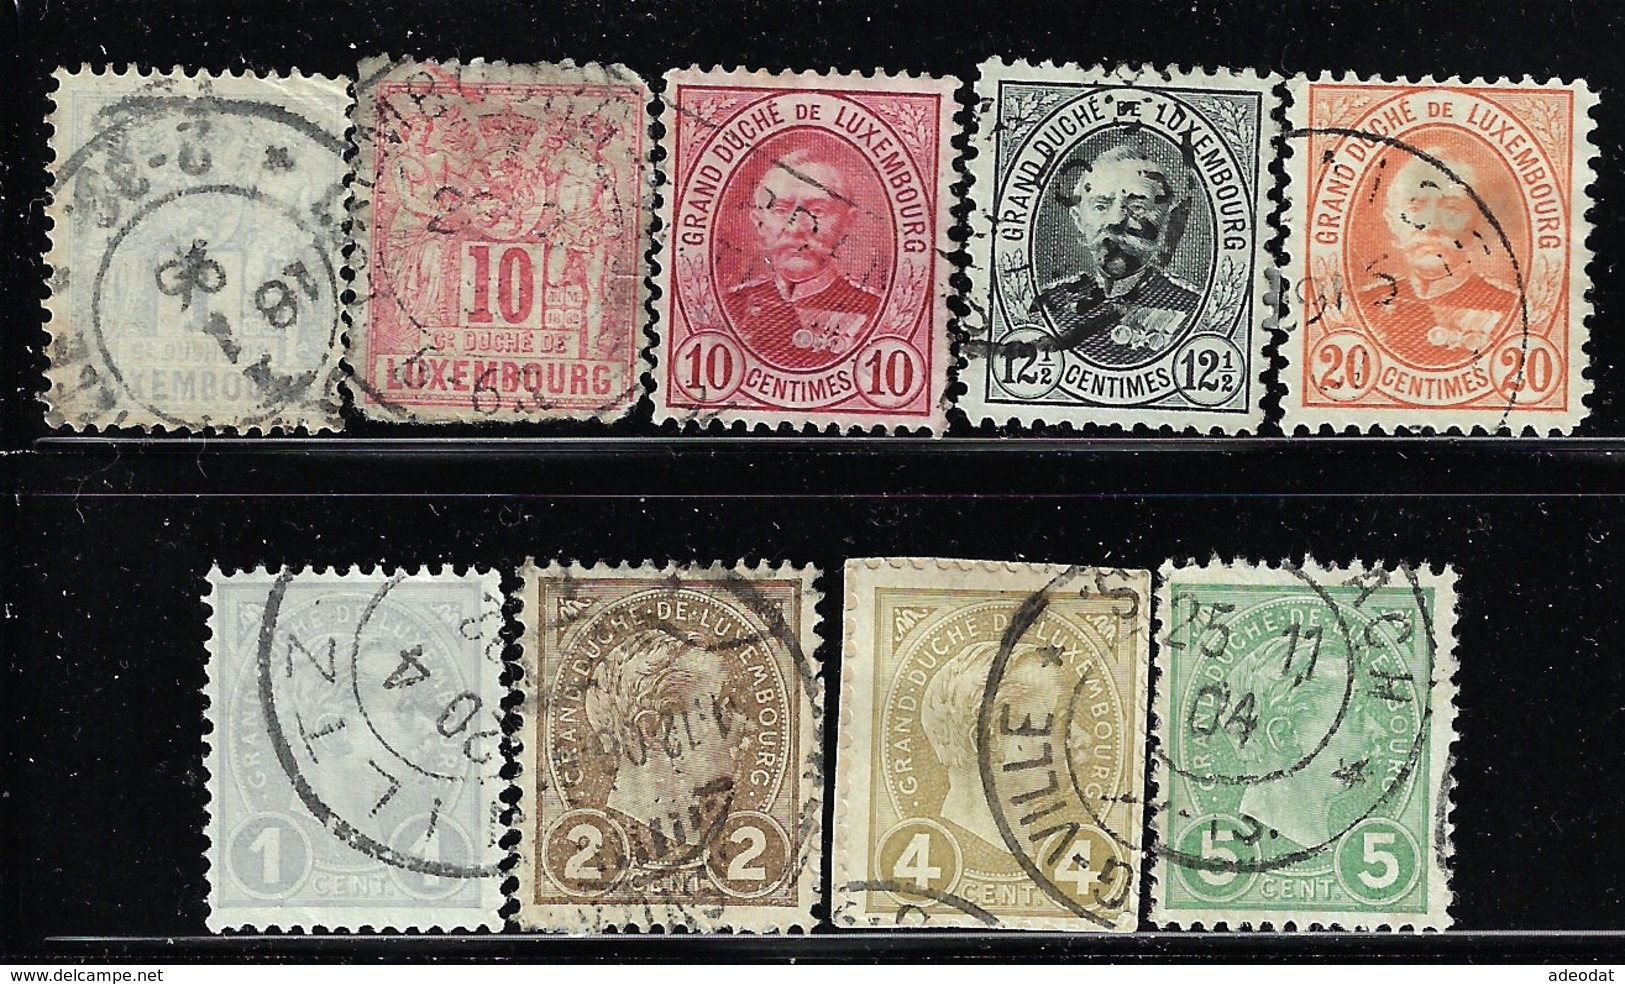 LUXEMBOURG 1882,1891 SCOTT 48,52,60-62,70-73 CANCELLED CATALOGUE VALUE US$4.40 - 1882 Allegorie